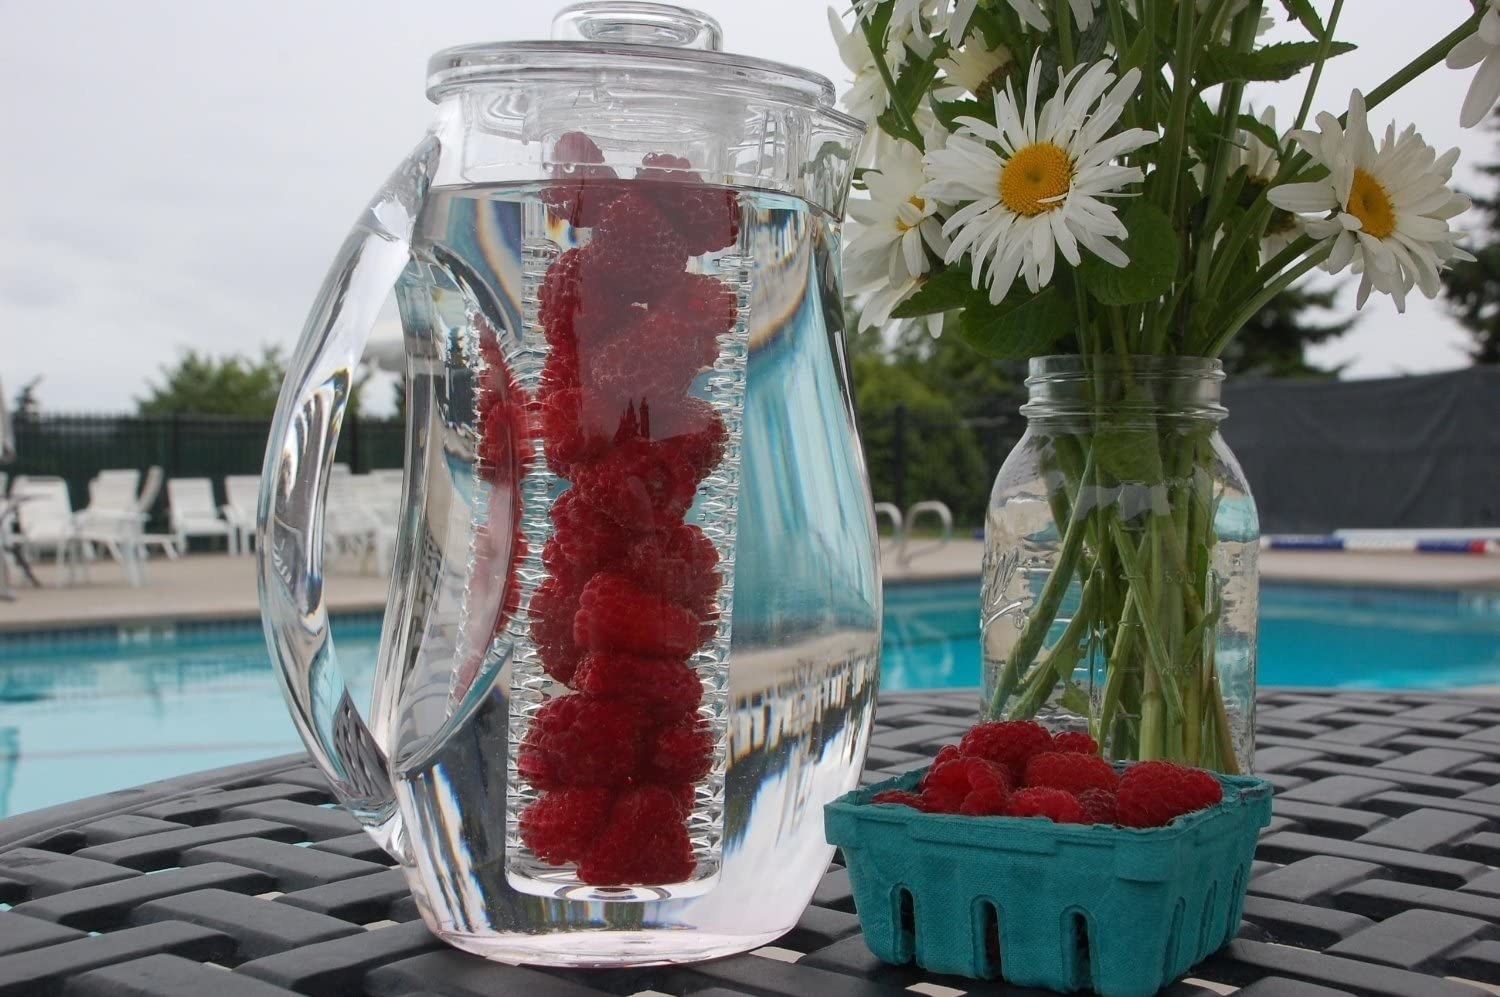 A fruit infusing pitcher on a patio table next to a basket of raspberries and a vase of daisies 